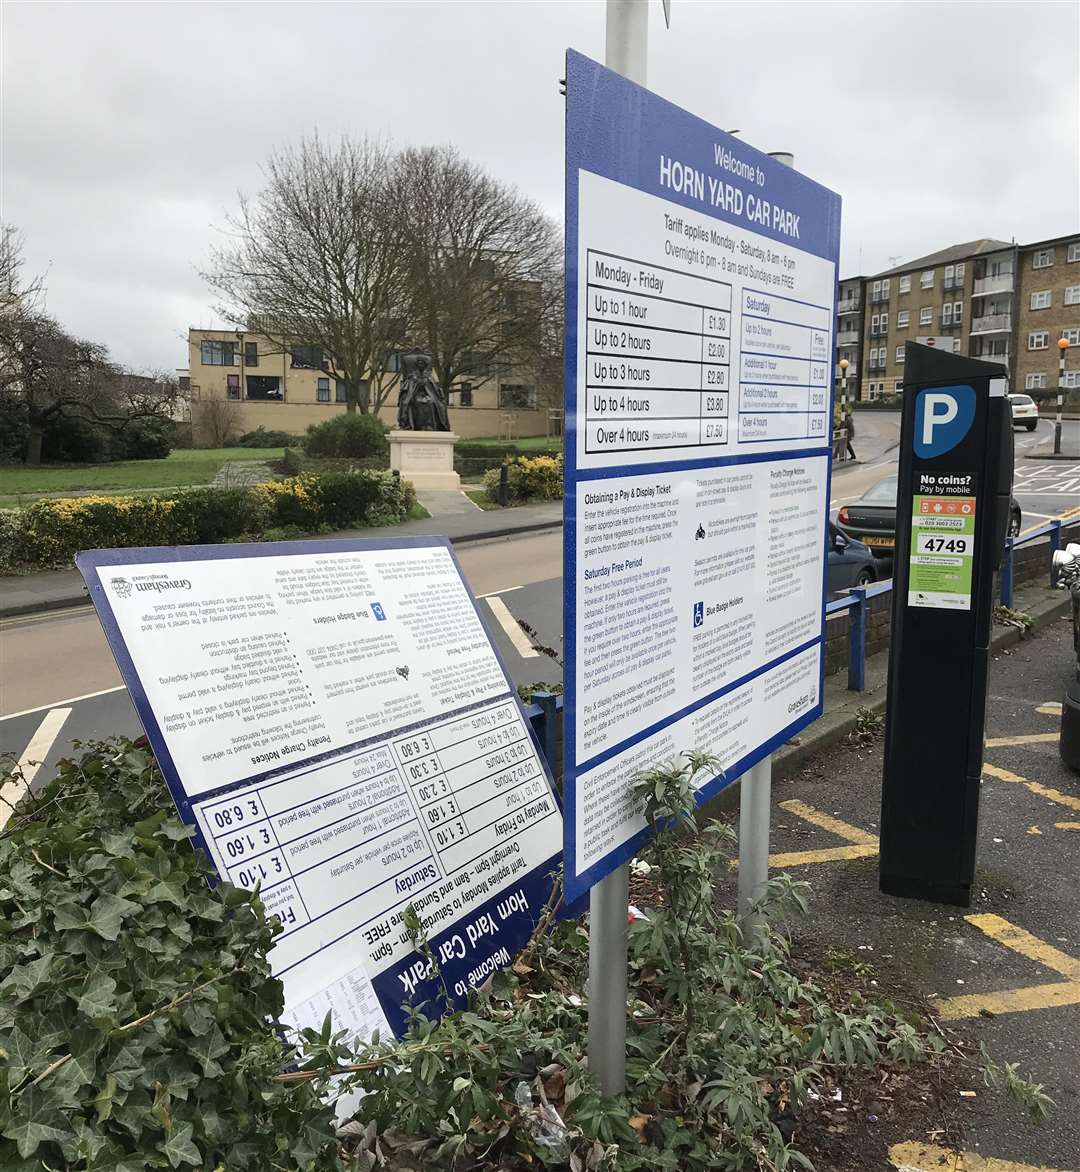 New signs show changes to parking charges in Horn Yard car park in Bank Street, Gravesend